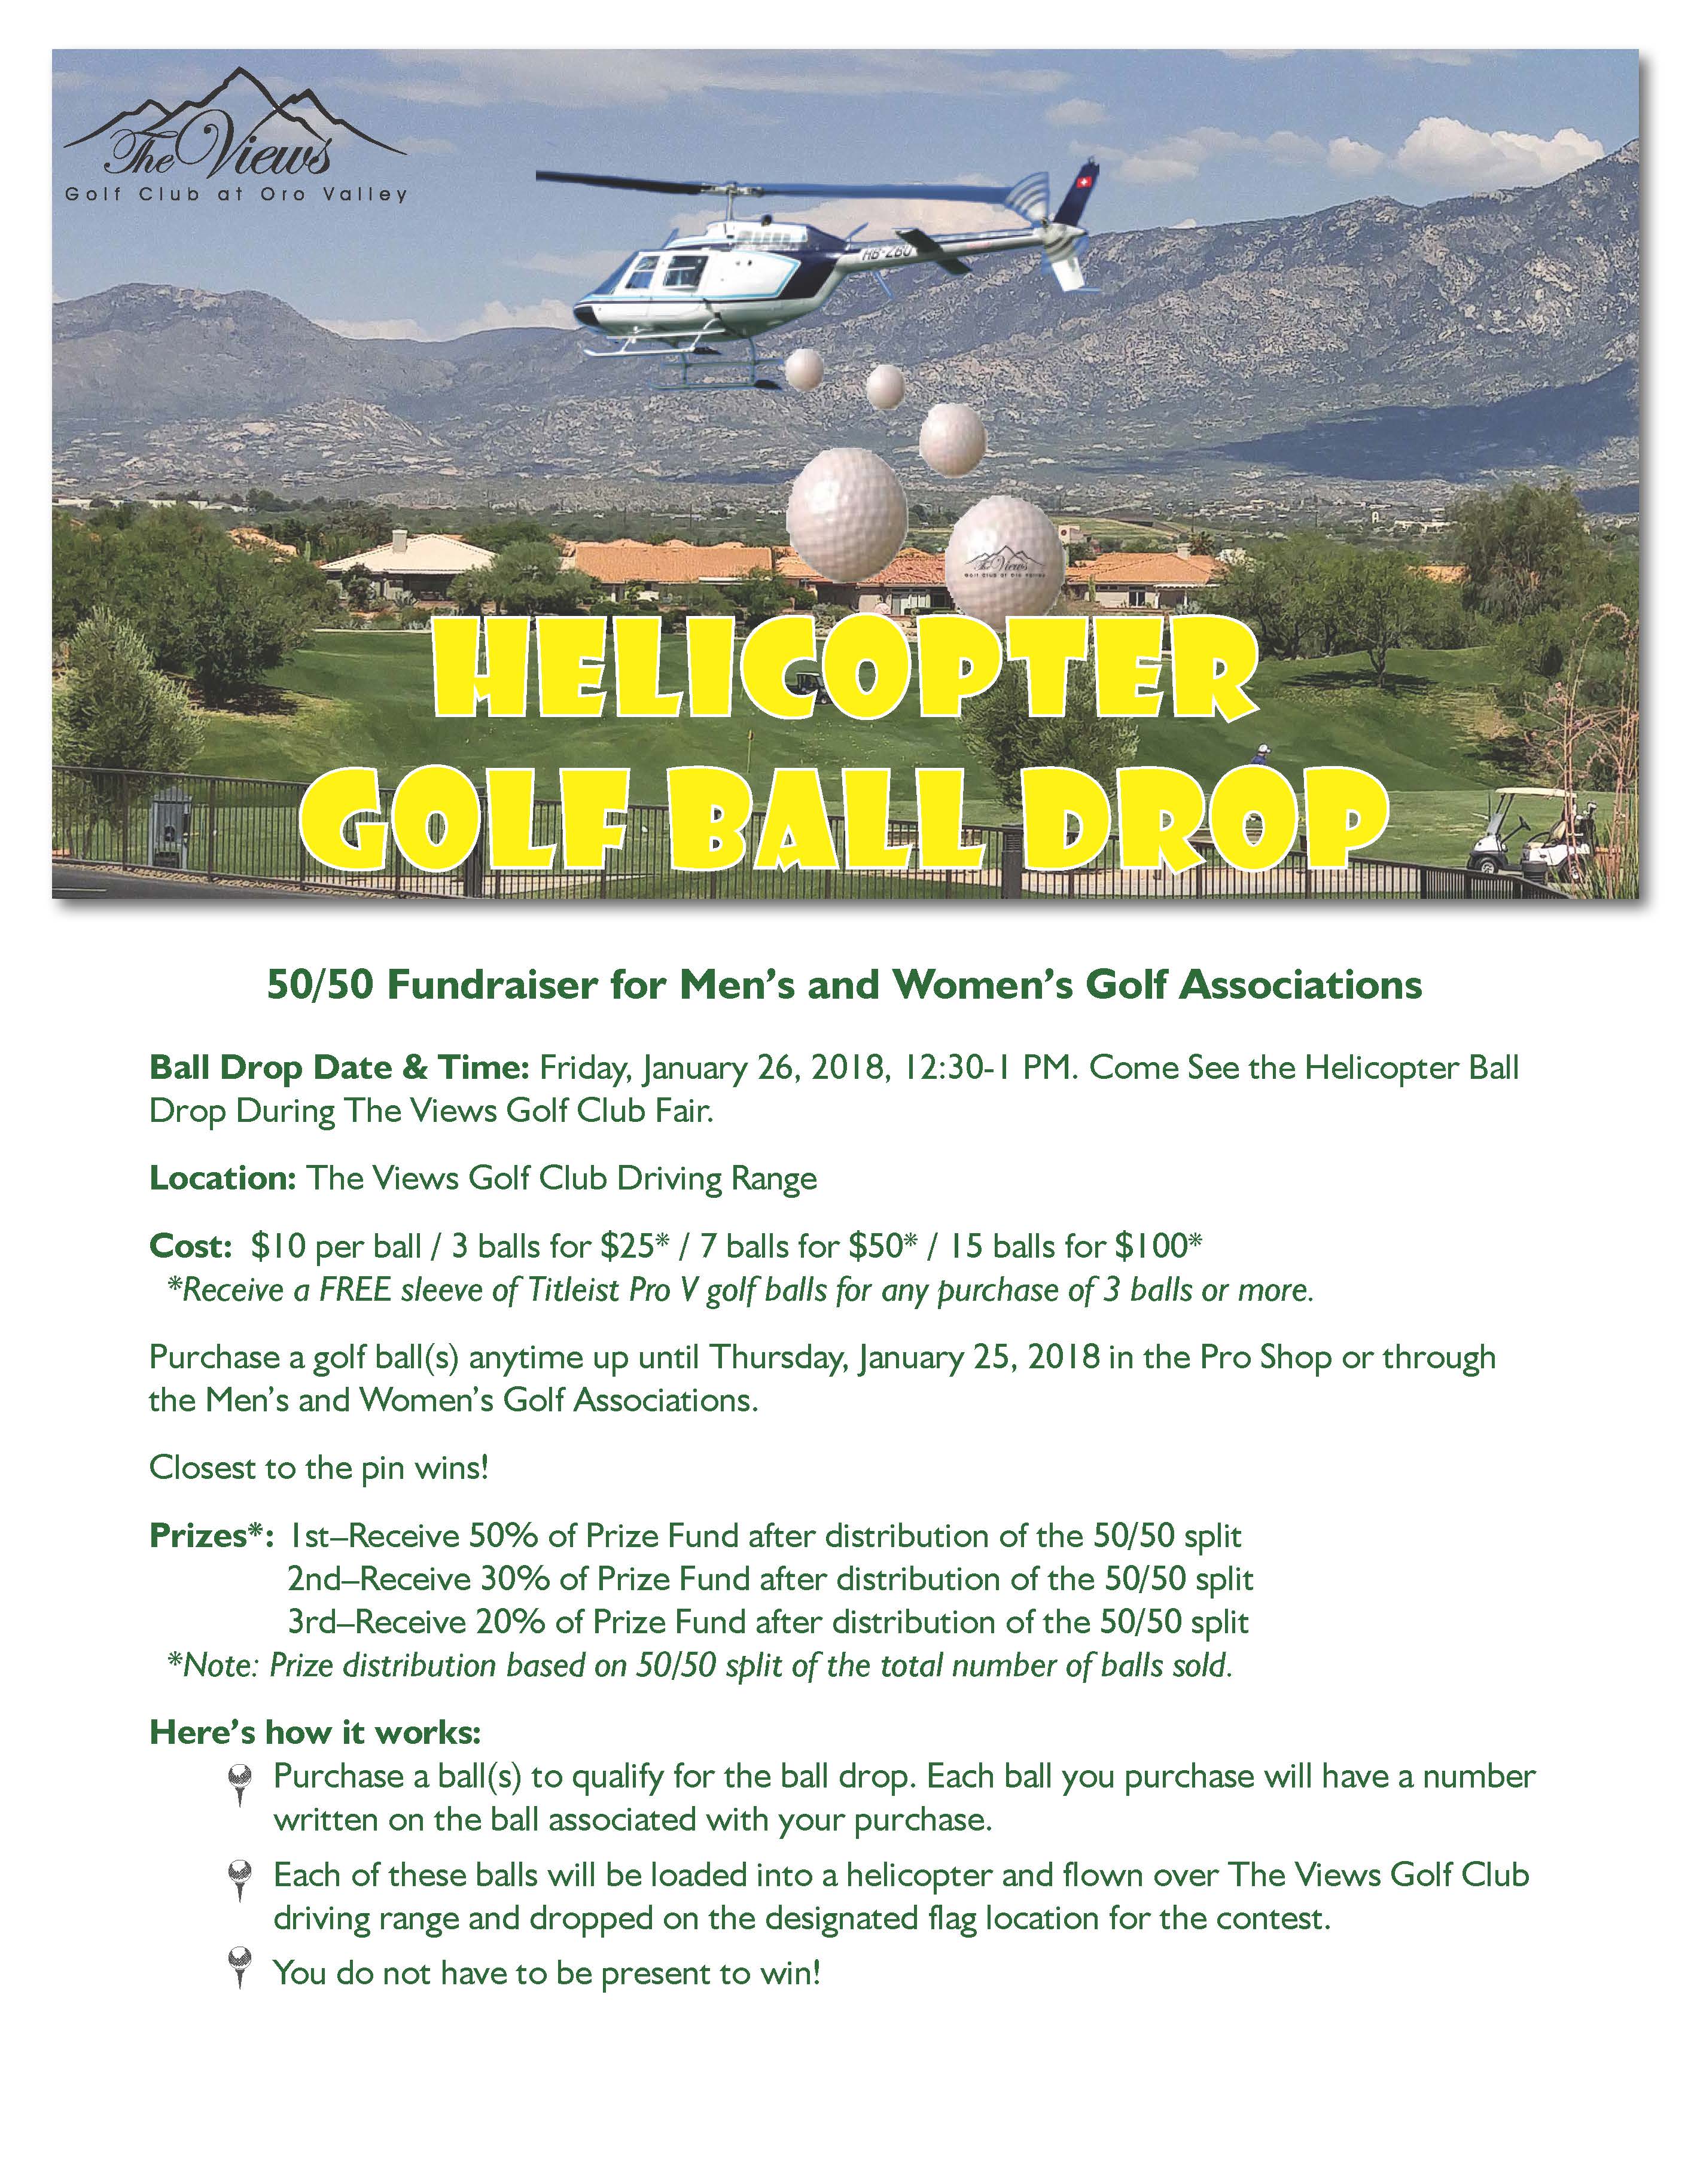 Helicopter Ball Drop flyer corrected 12 12 17